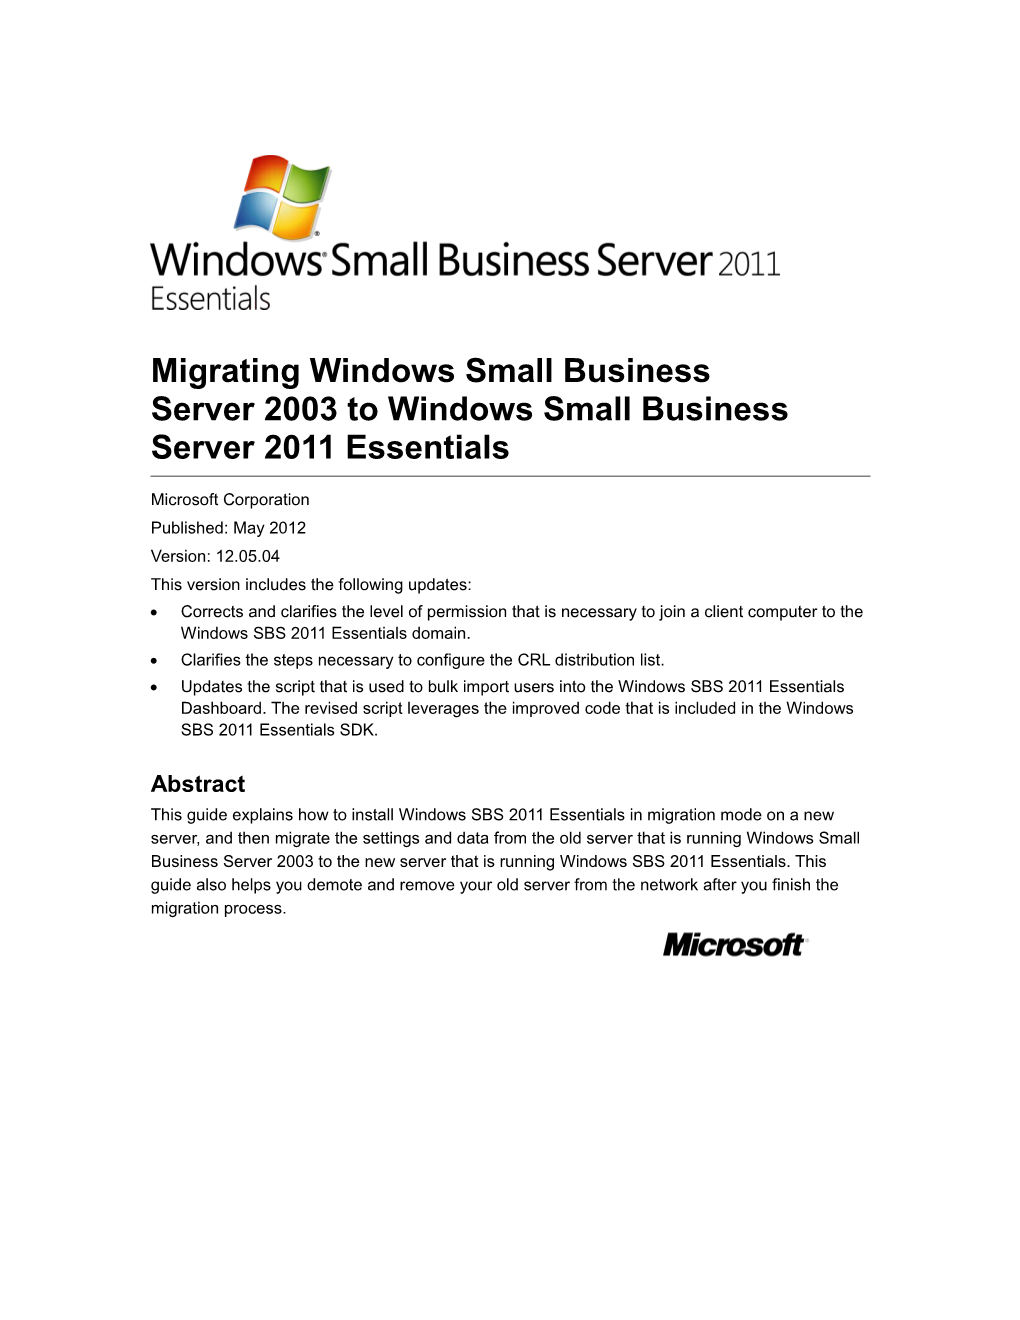 Migrating Windows Small Business Server2003 to Windows Small Business Server2011 Essentials